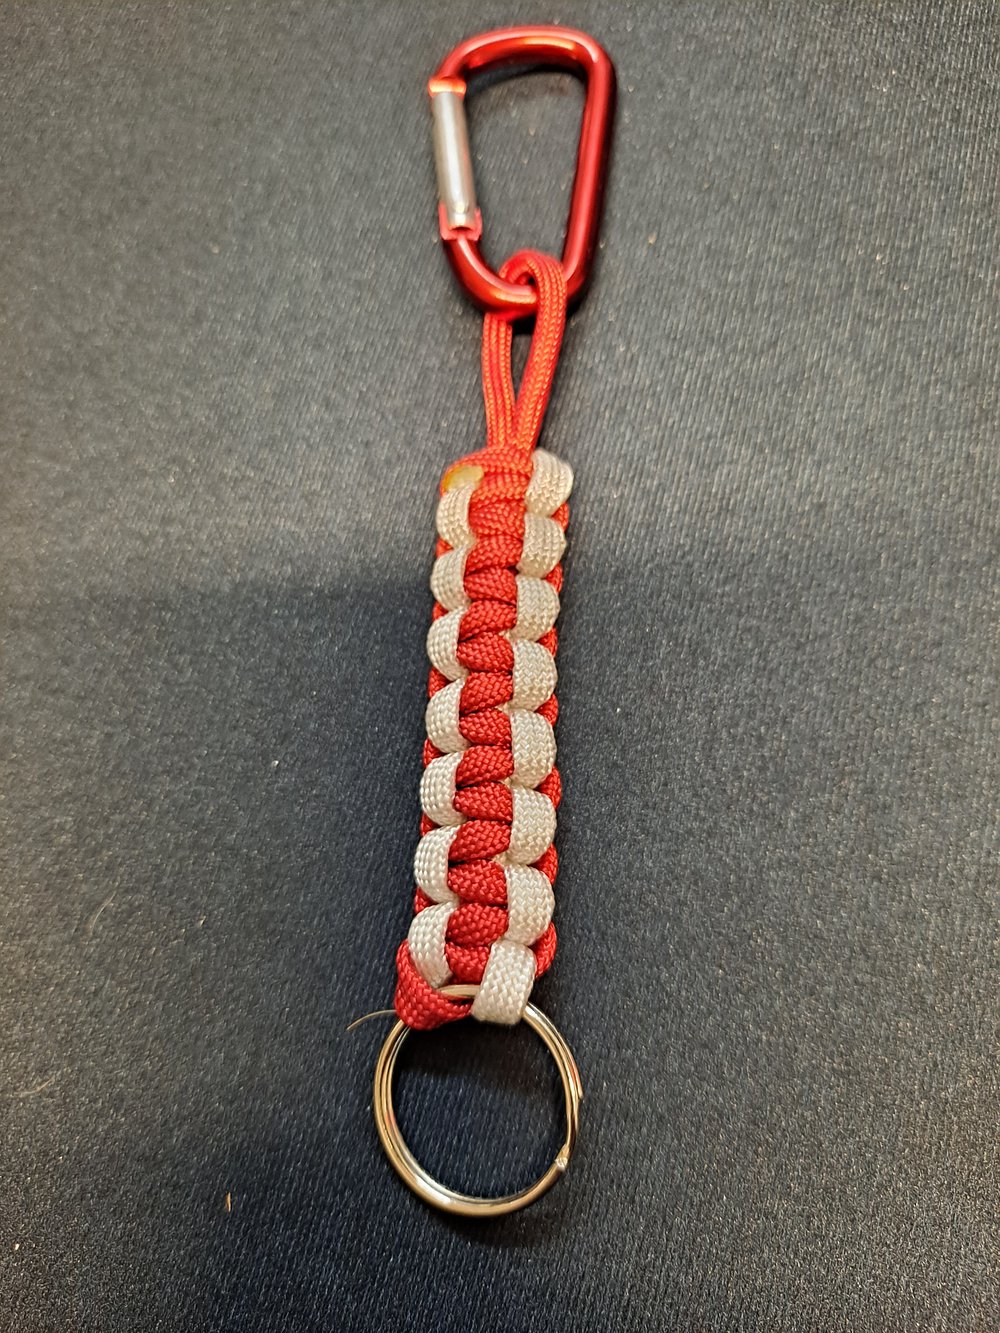 Image of Key chain